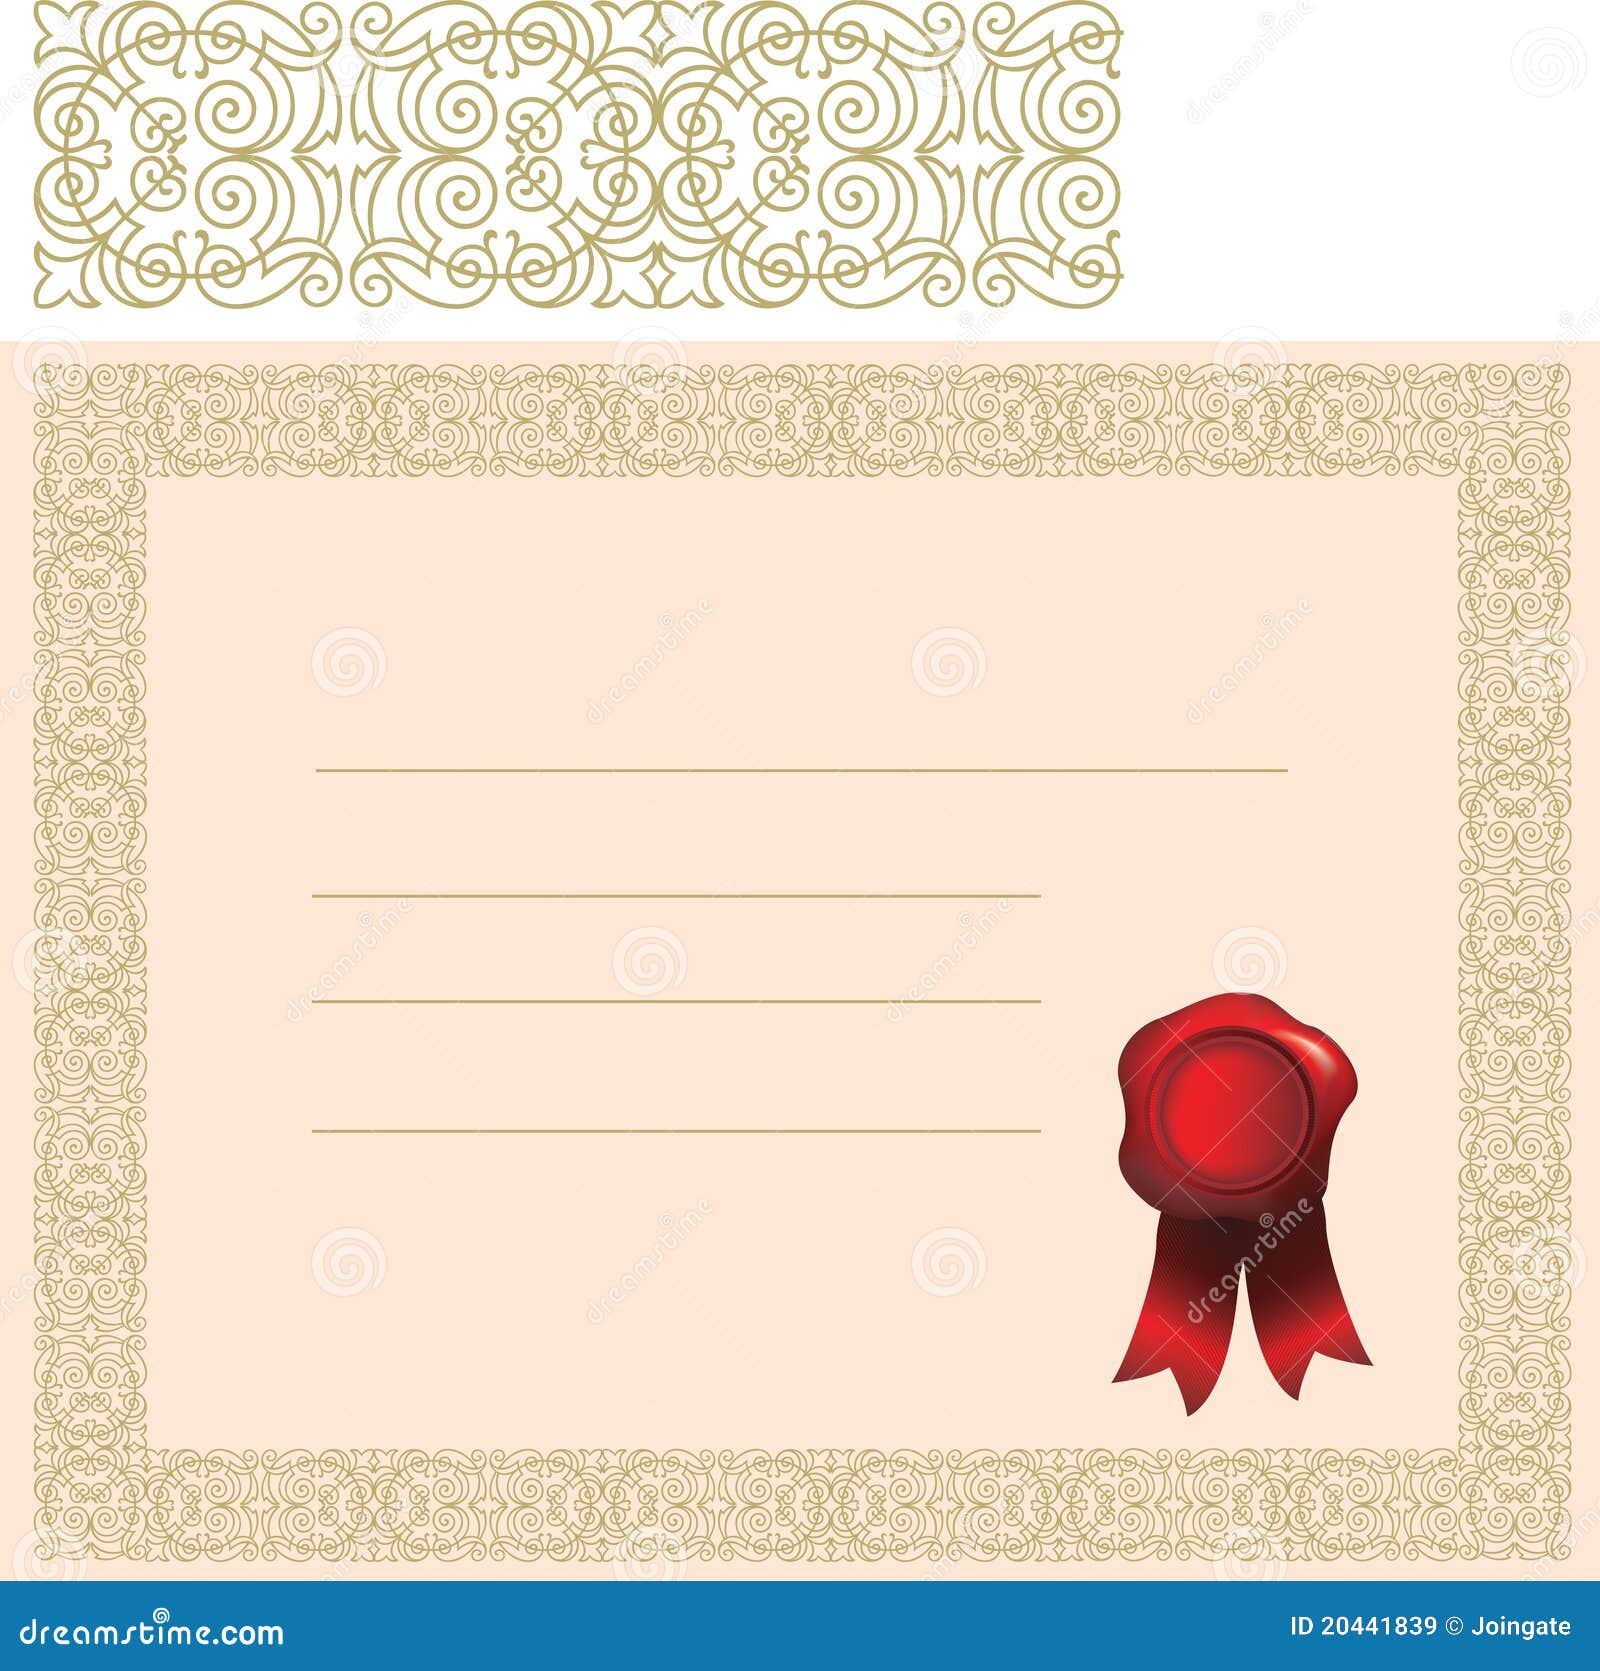 certificate with elaborate border